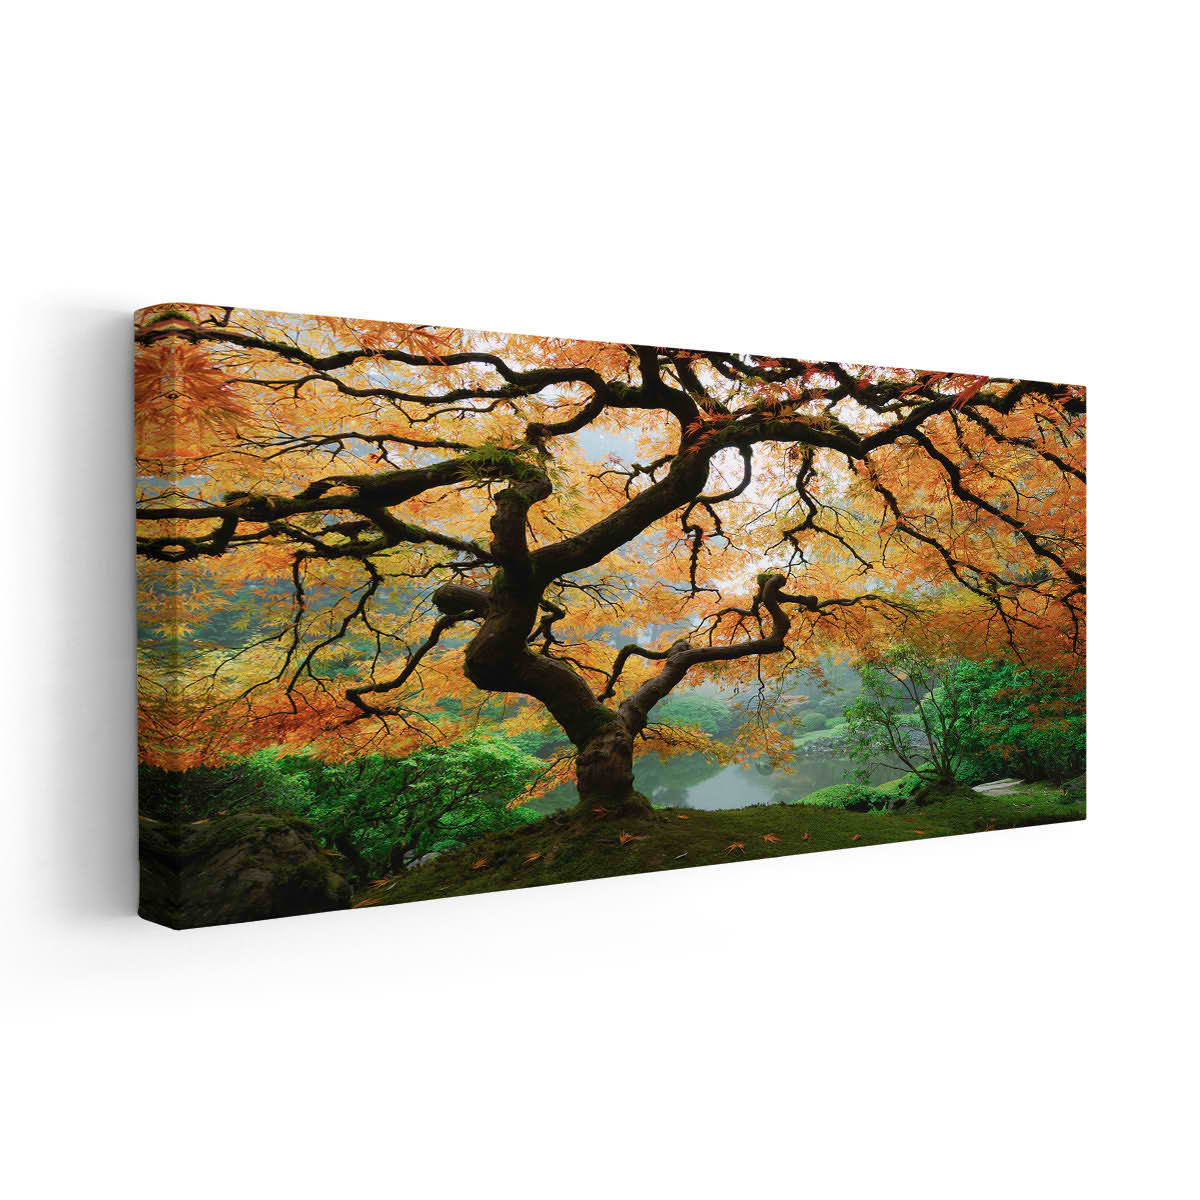 https://cdn.shopify.com/s/files/1/0099/0363/6546/products/Japanese-Maple-in-Autumn-wall-art-1pc-887529_1600x.jpg?v=1680095758